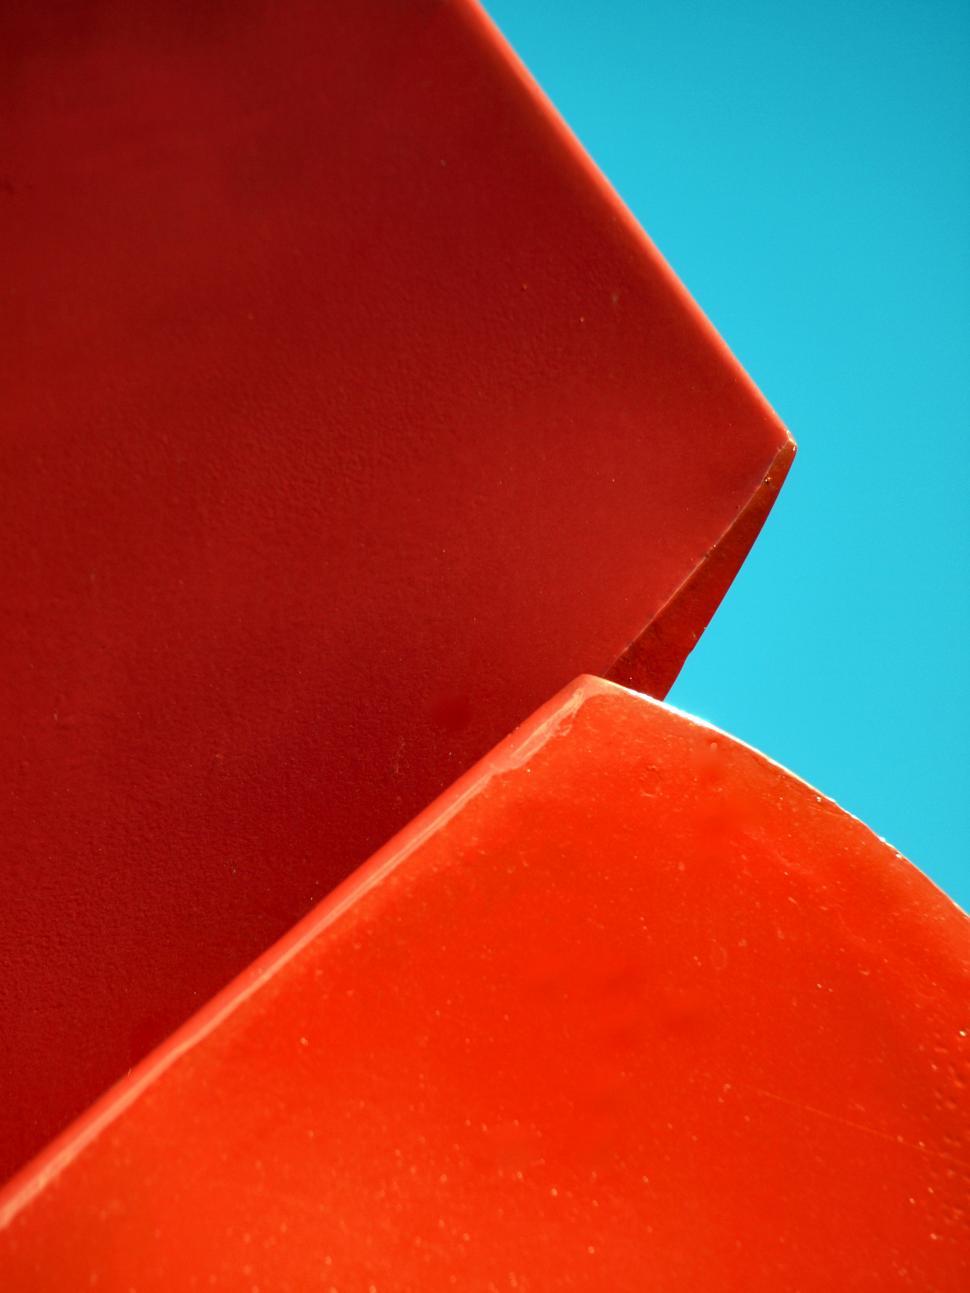 Free Image of A close up of a red object 